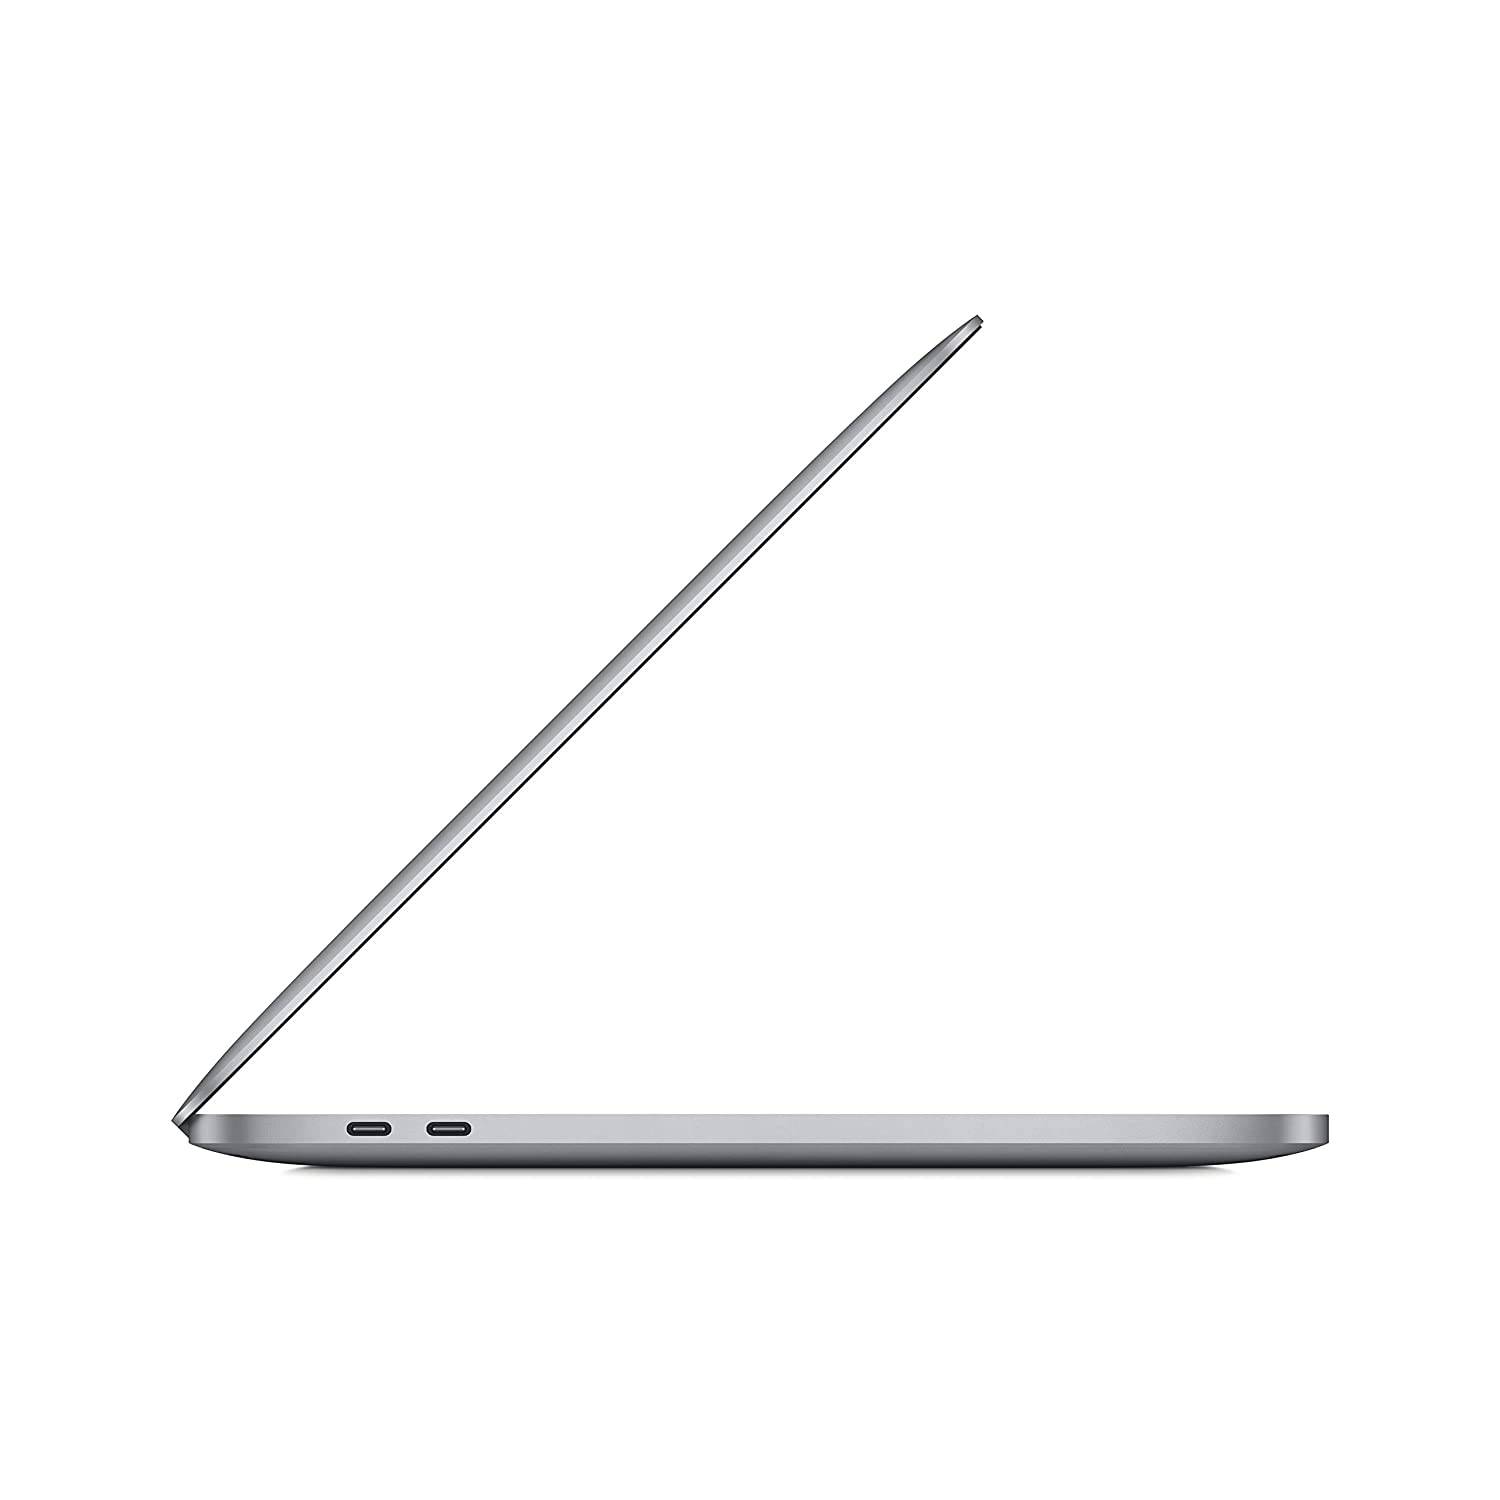 Apple MacBook Pro With M1 Chip (13-inch, 8GB RAM, 256GB SSD) - Space Grey